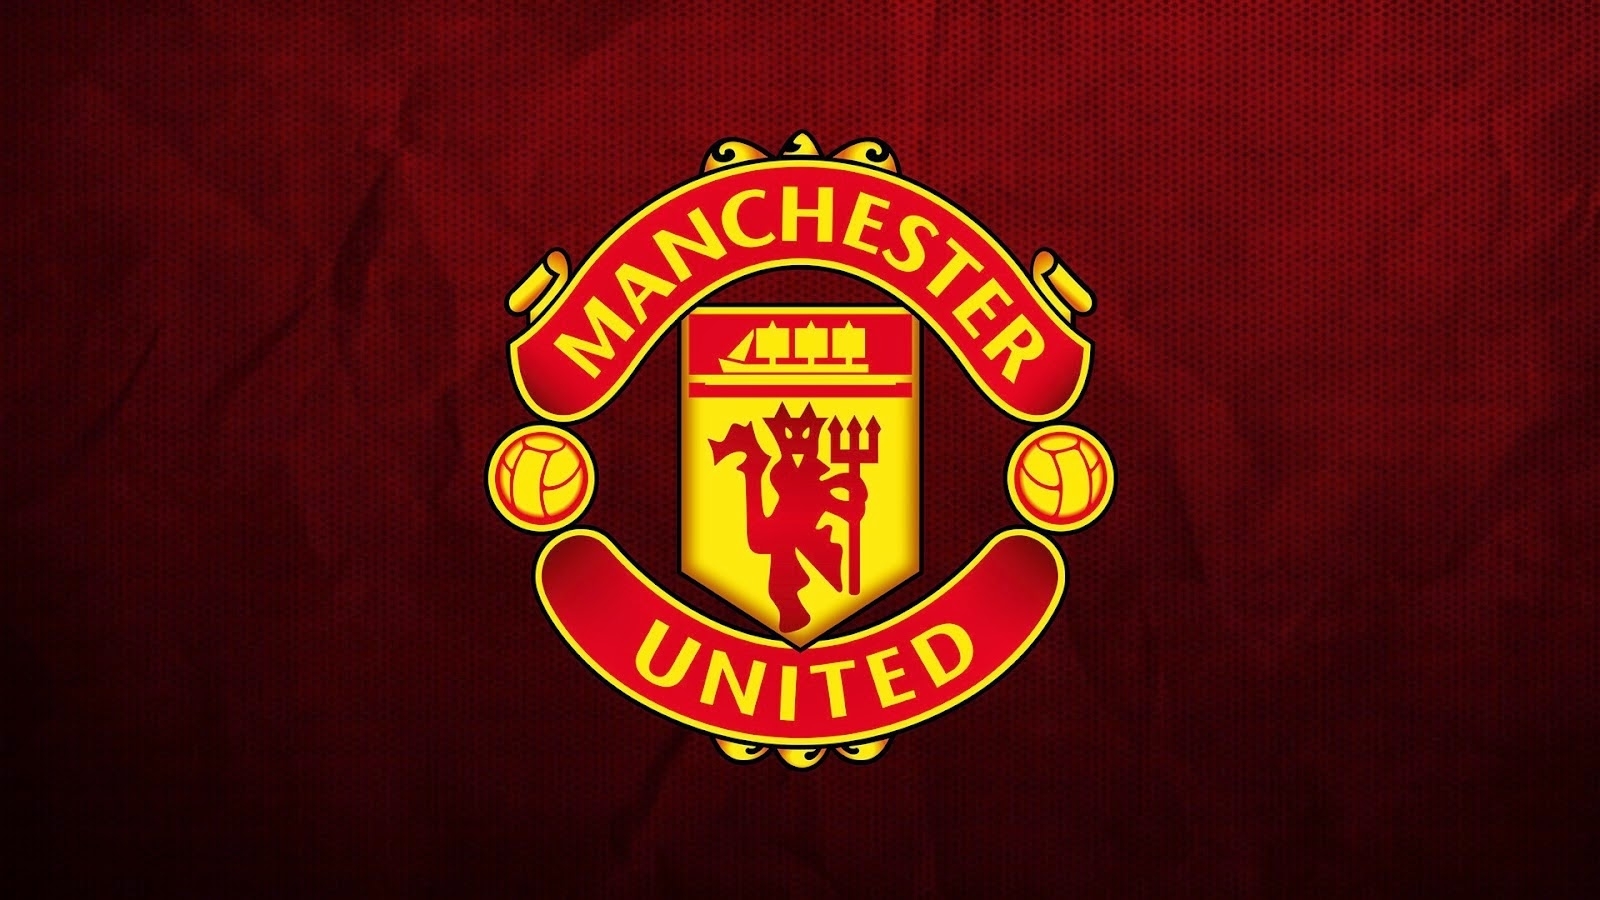 download manchester united wallpapers hd wallpaper